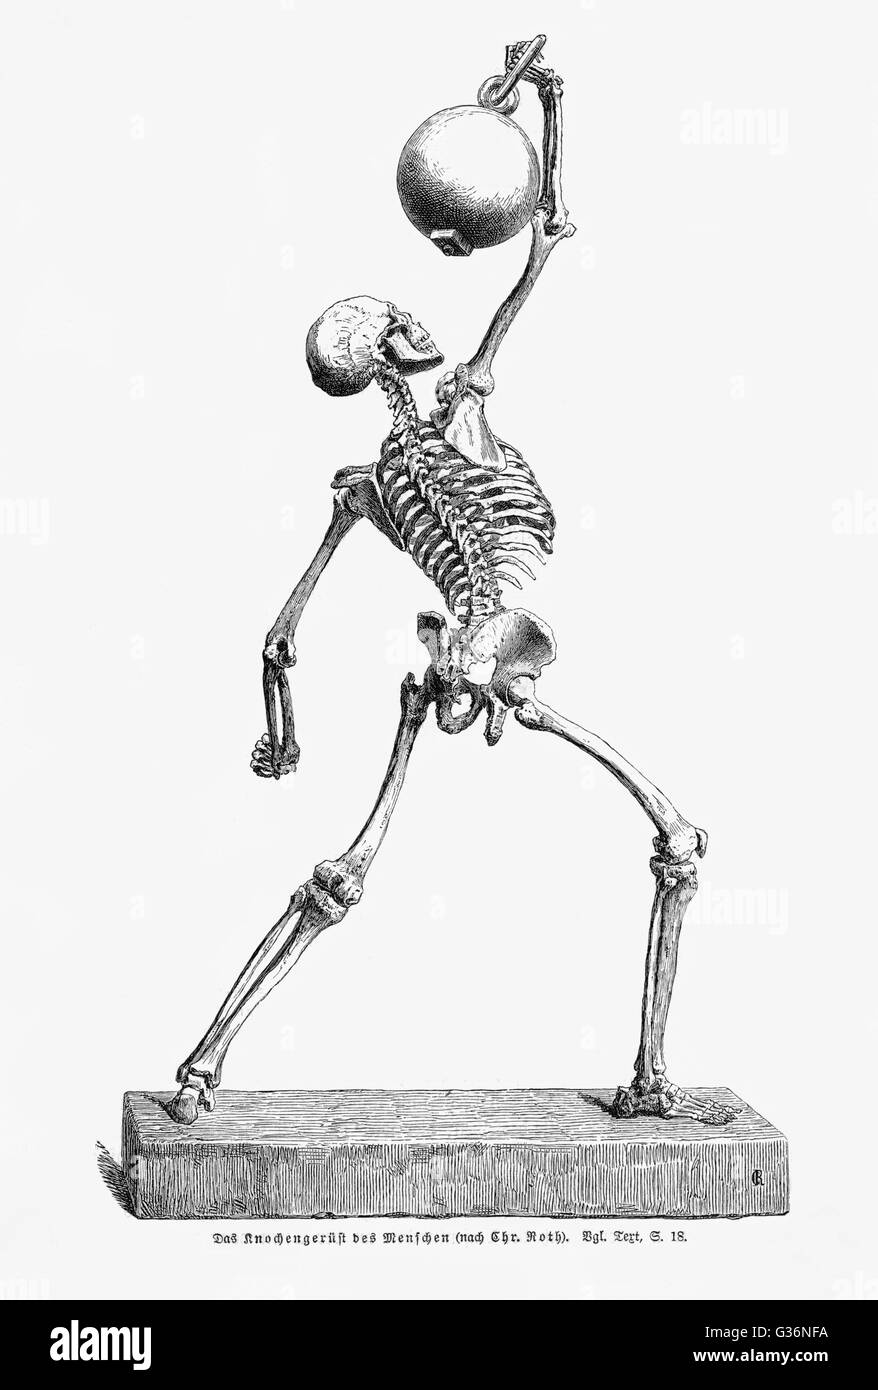 A human skeleton in movement, holding a heavy object above its head.            Date: late 19th century Stock Photo